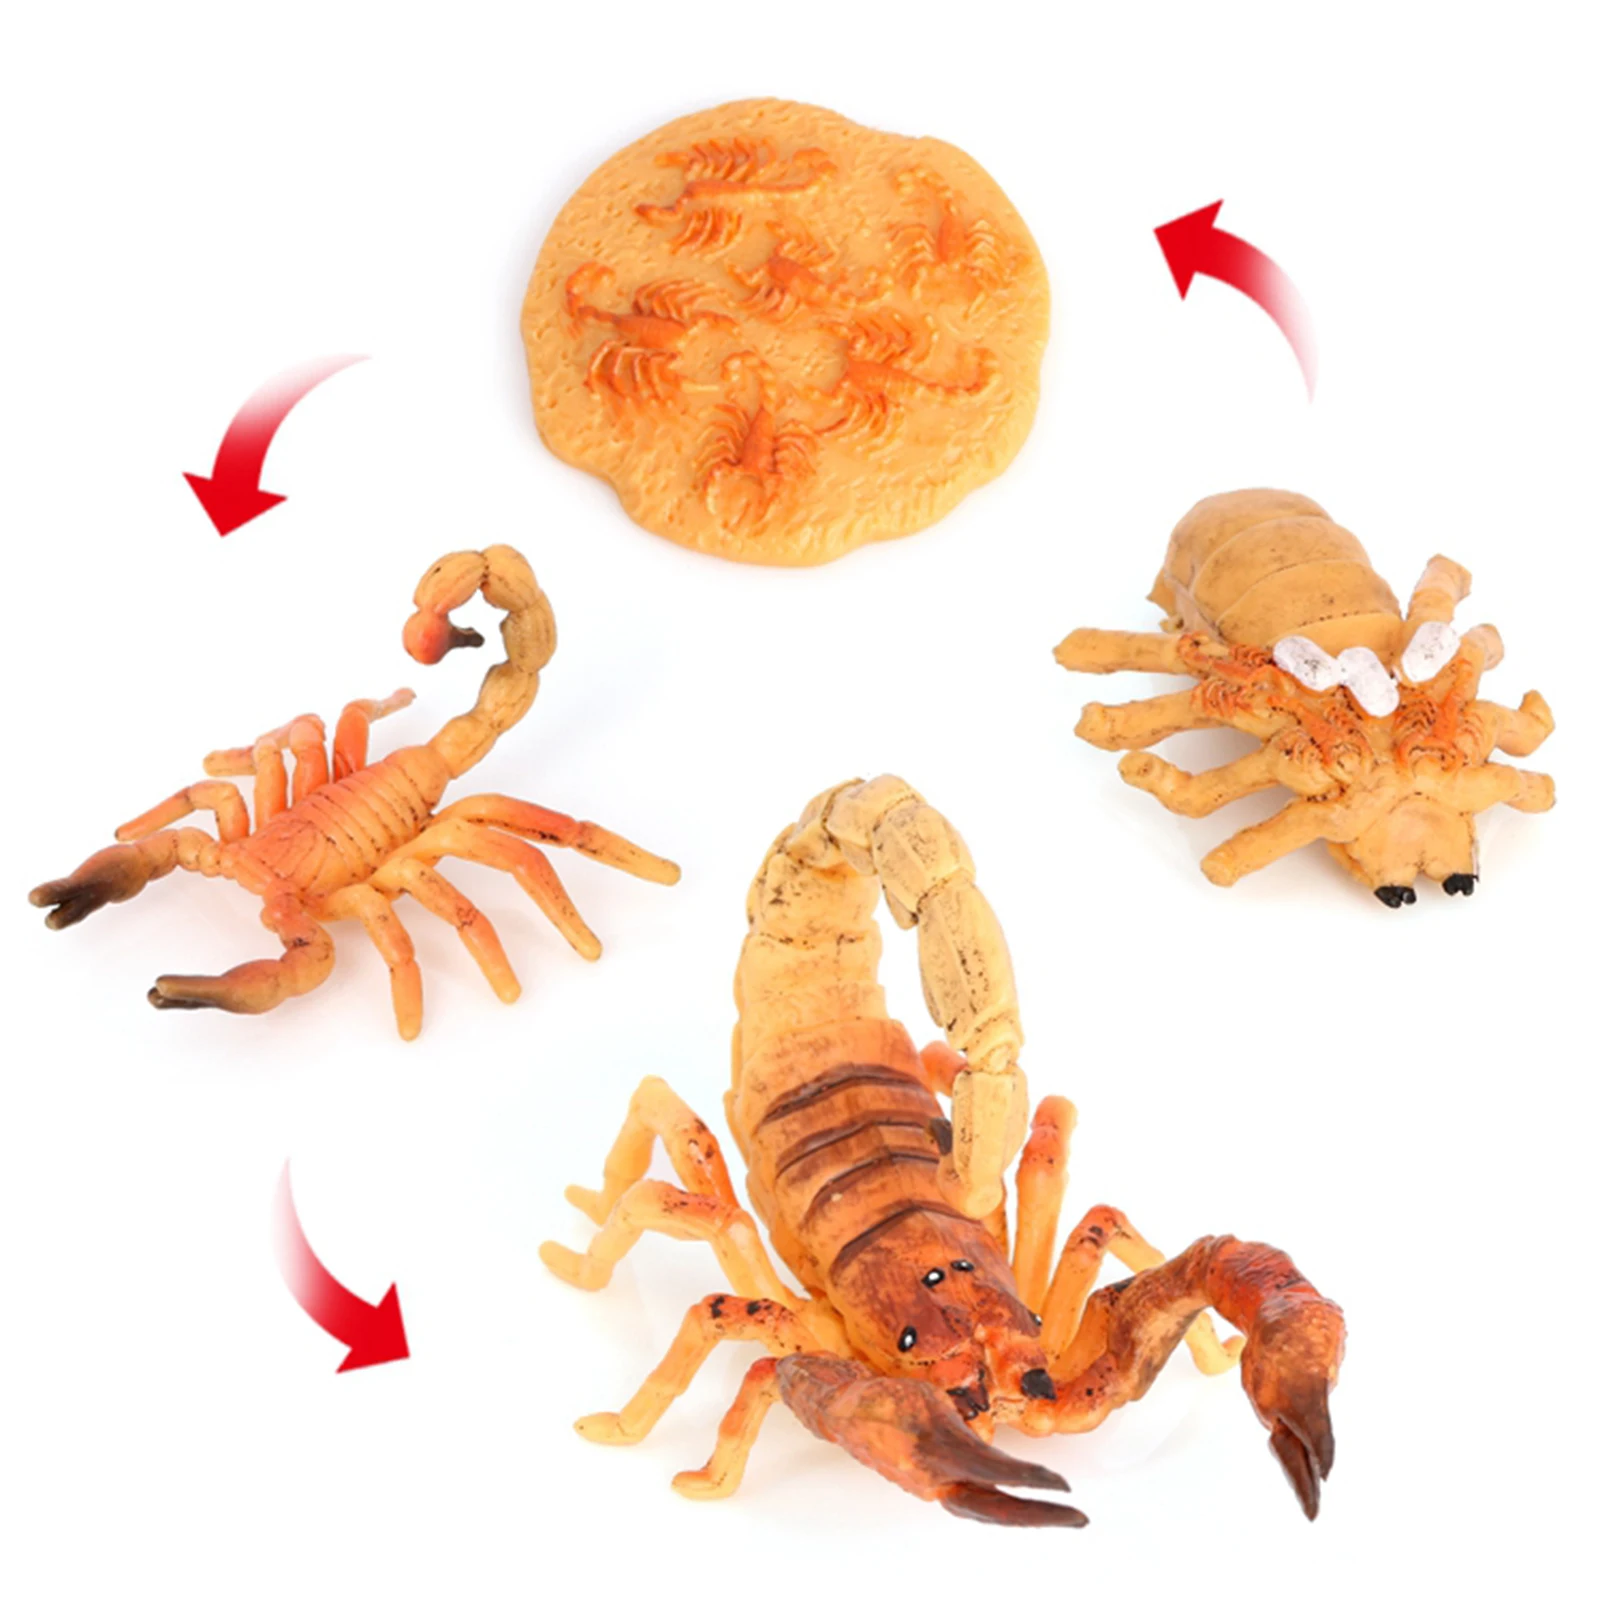 Real Scorpion Growth History scorpion Lifecycle teaching taxidermy insect 